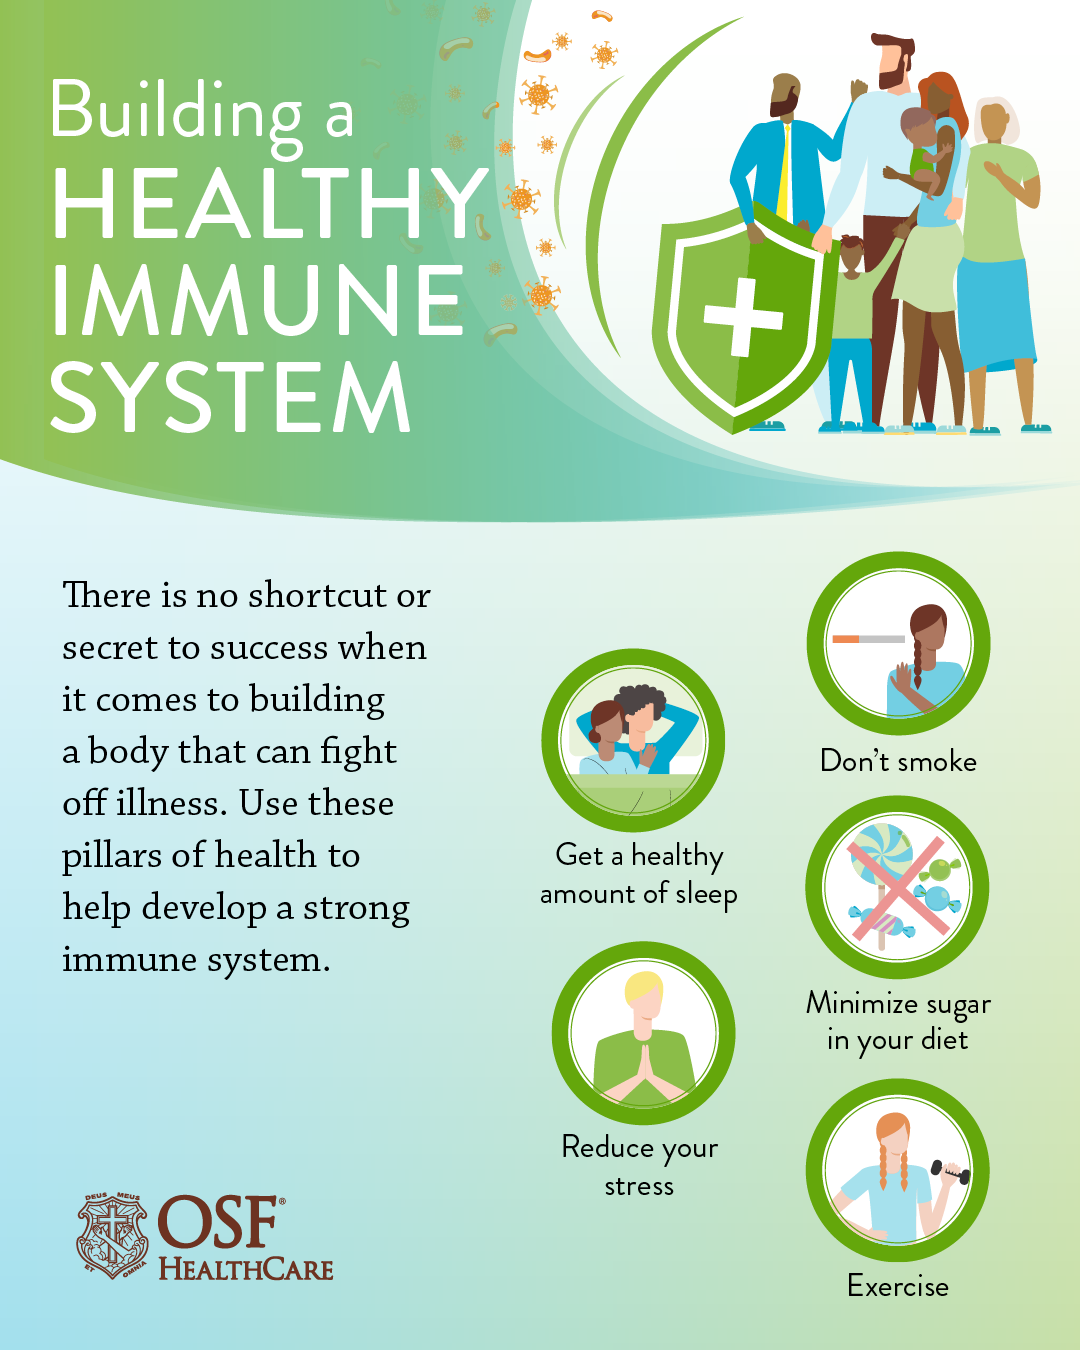 Get To Know The Immune System Osf Healthcare